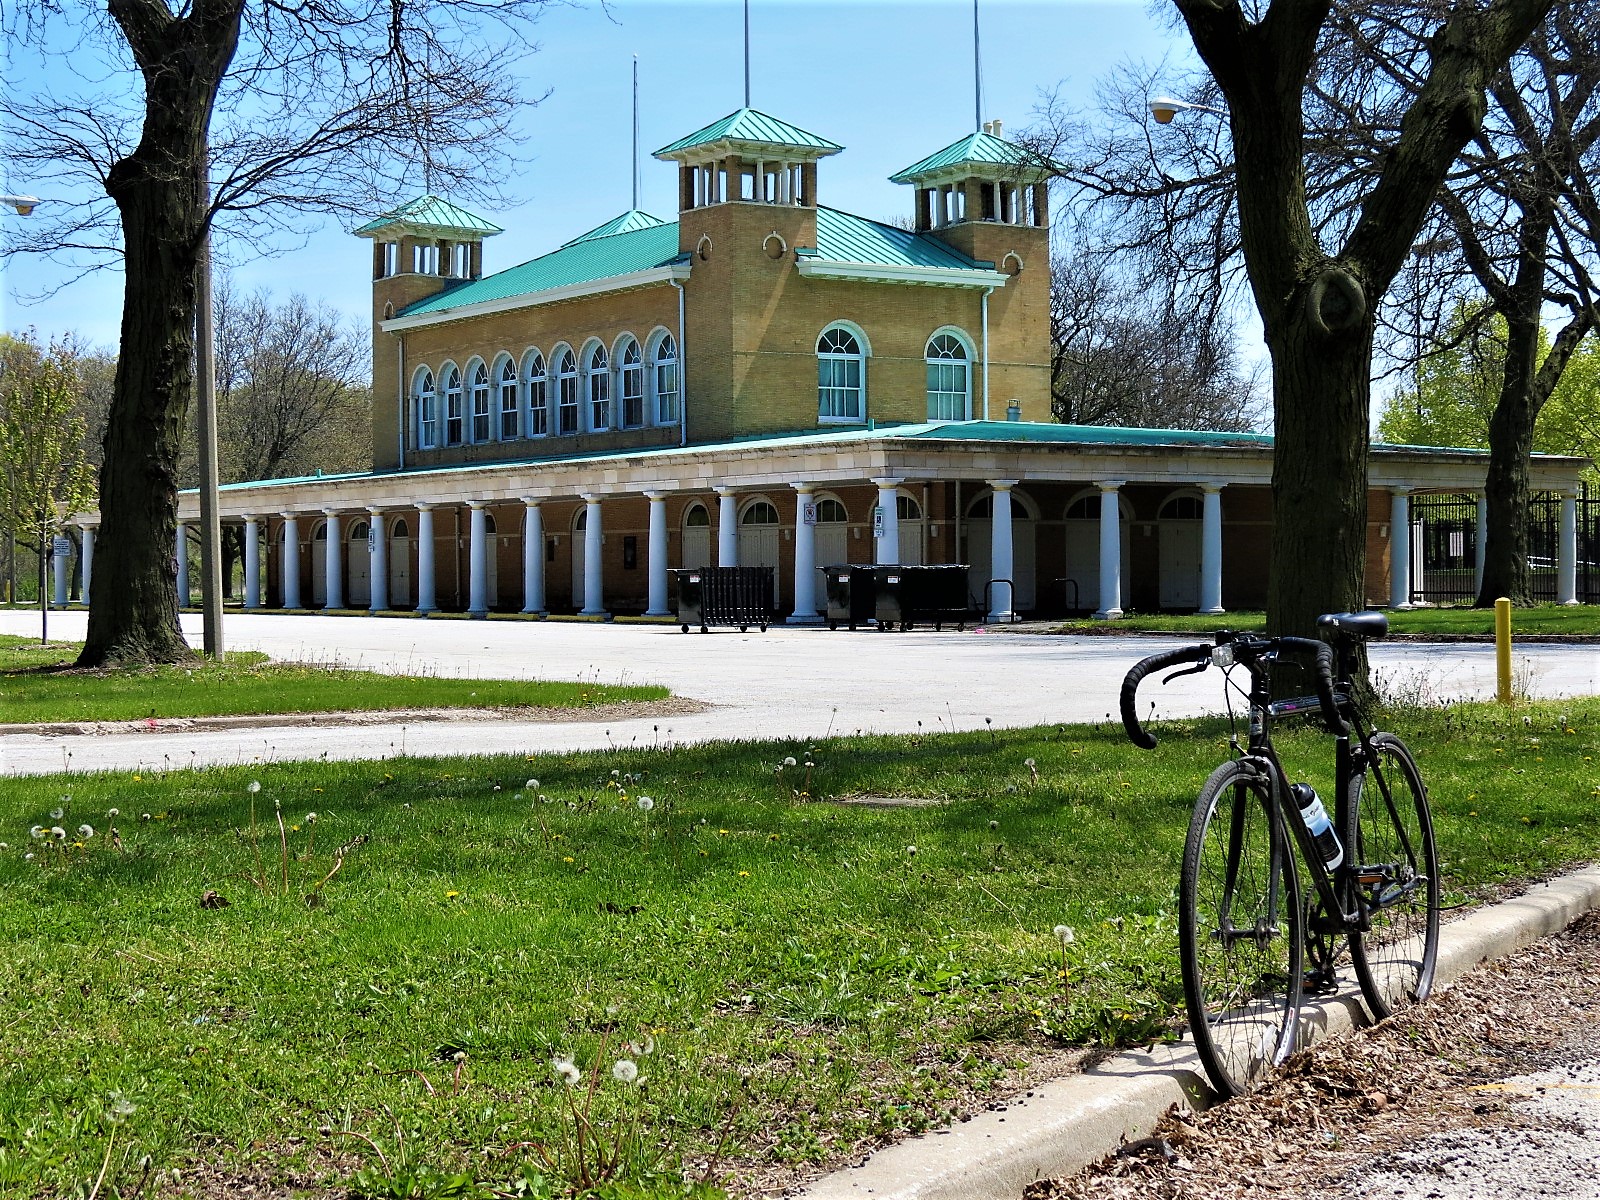 A tour bike standing in the foreground with a two story 1890s two story building with corner towers on the center mass and a collonade veranda around the first.